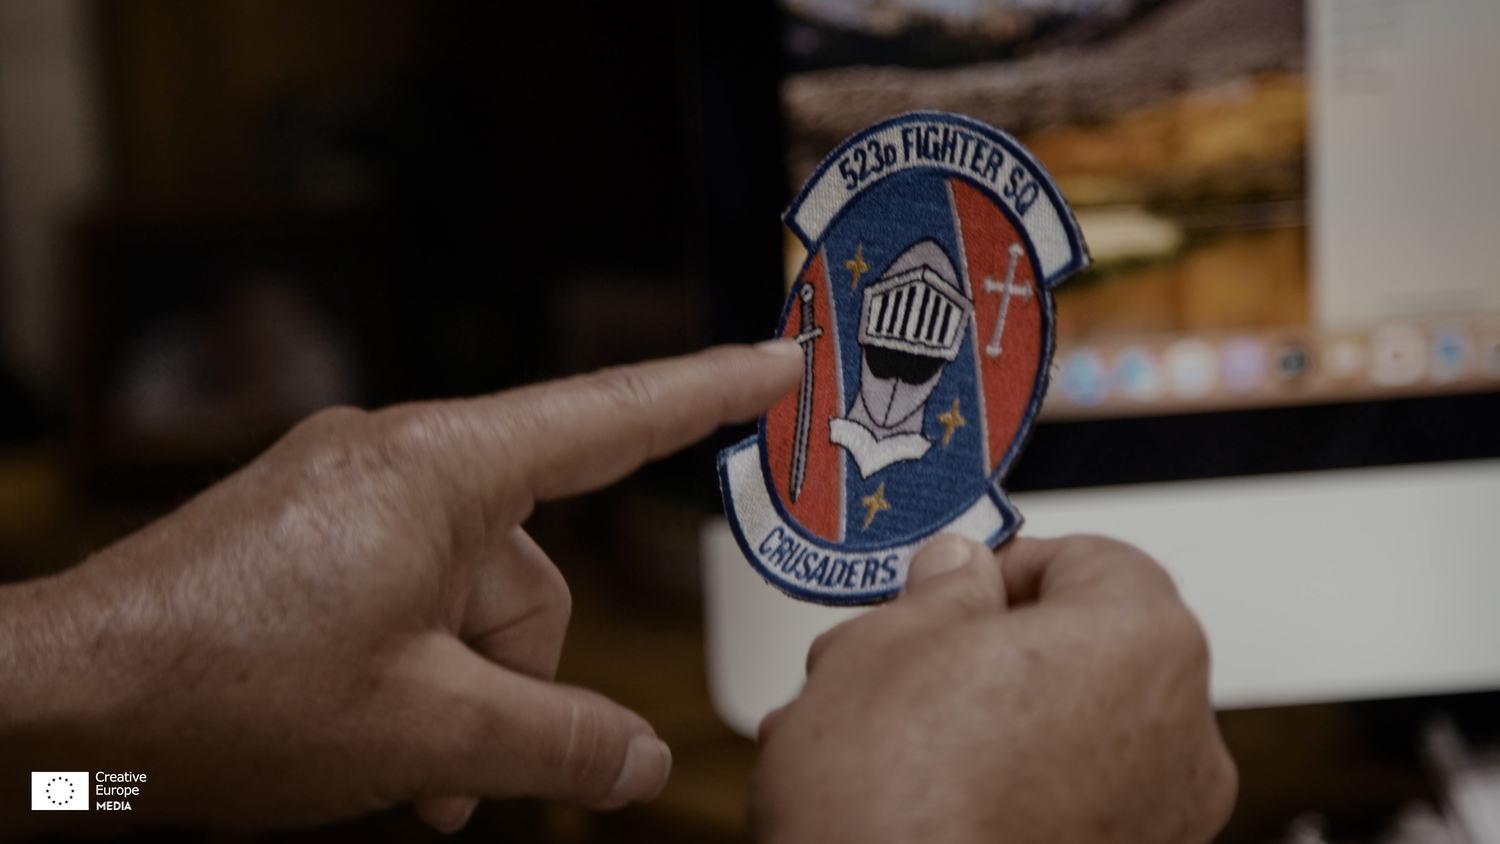 A military patch shown in a scene from Tonje Hessen Schei’s documentary 